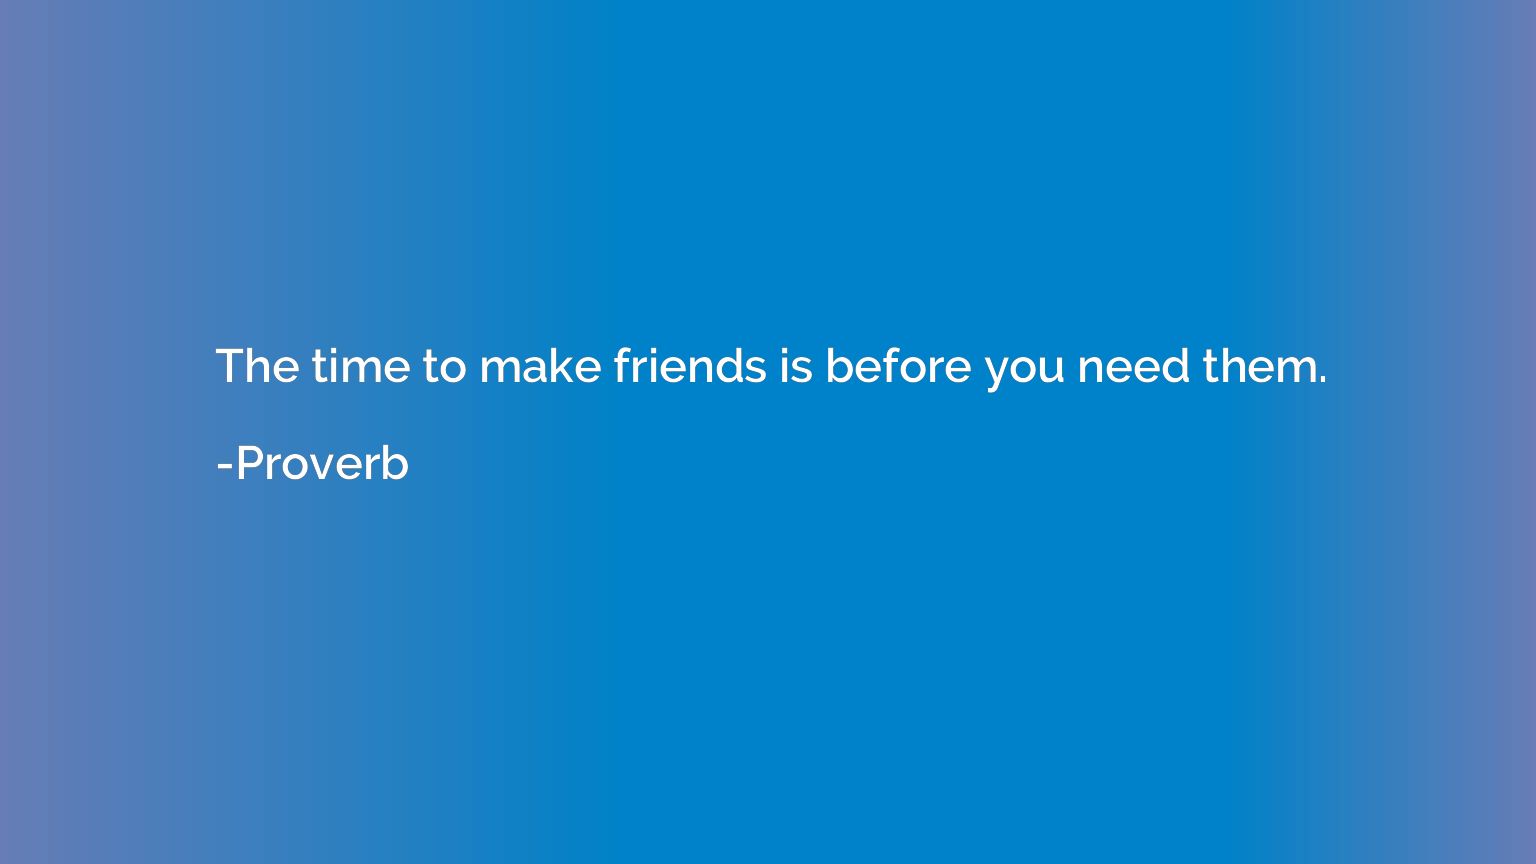 The time to make friends is before you need them.